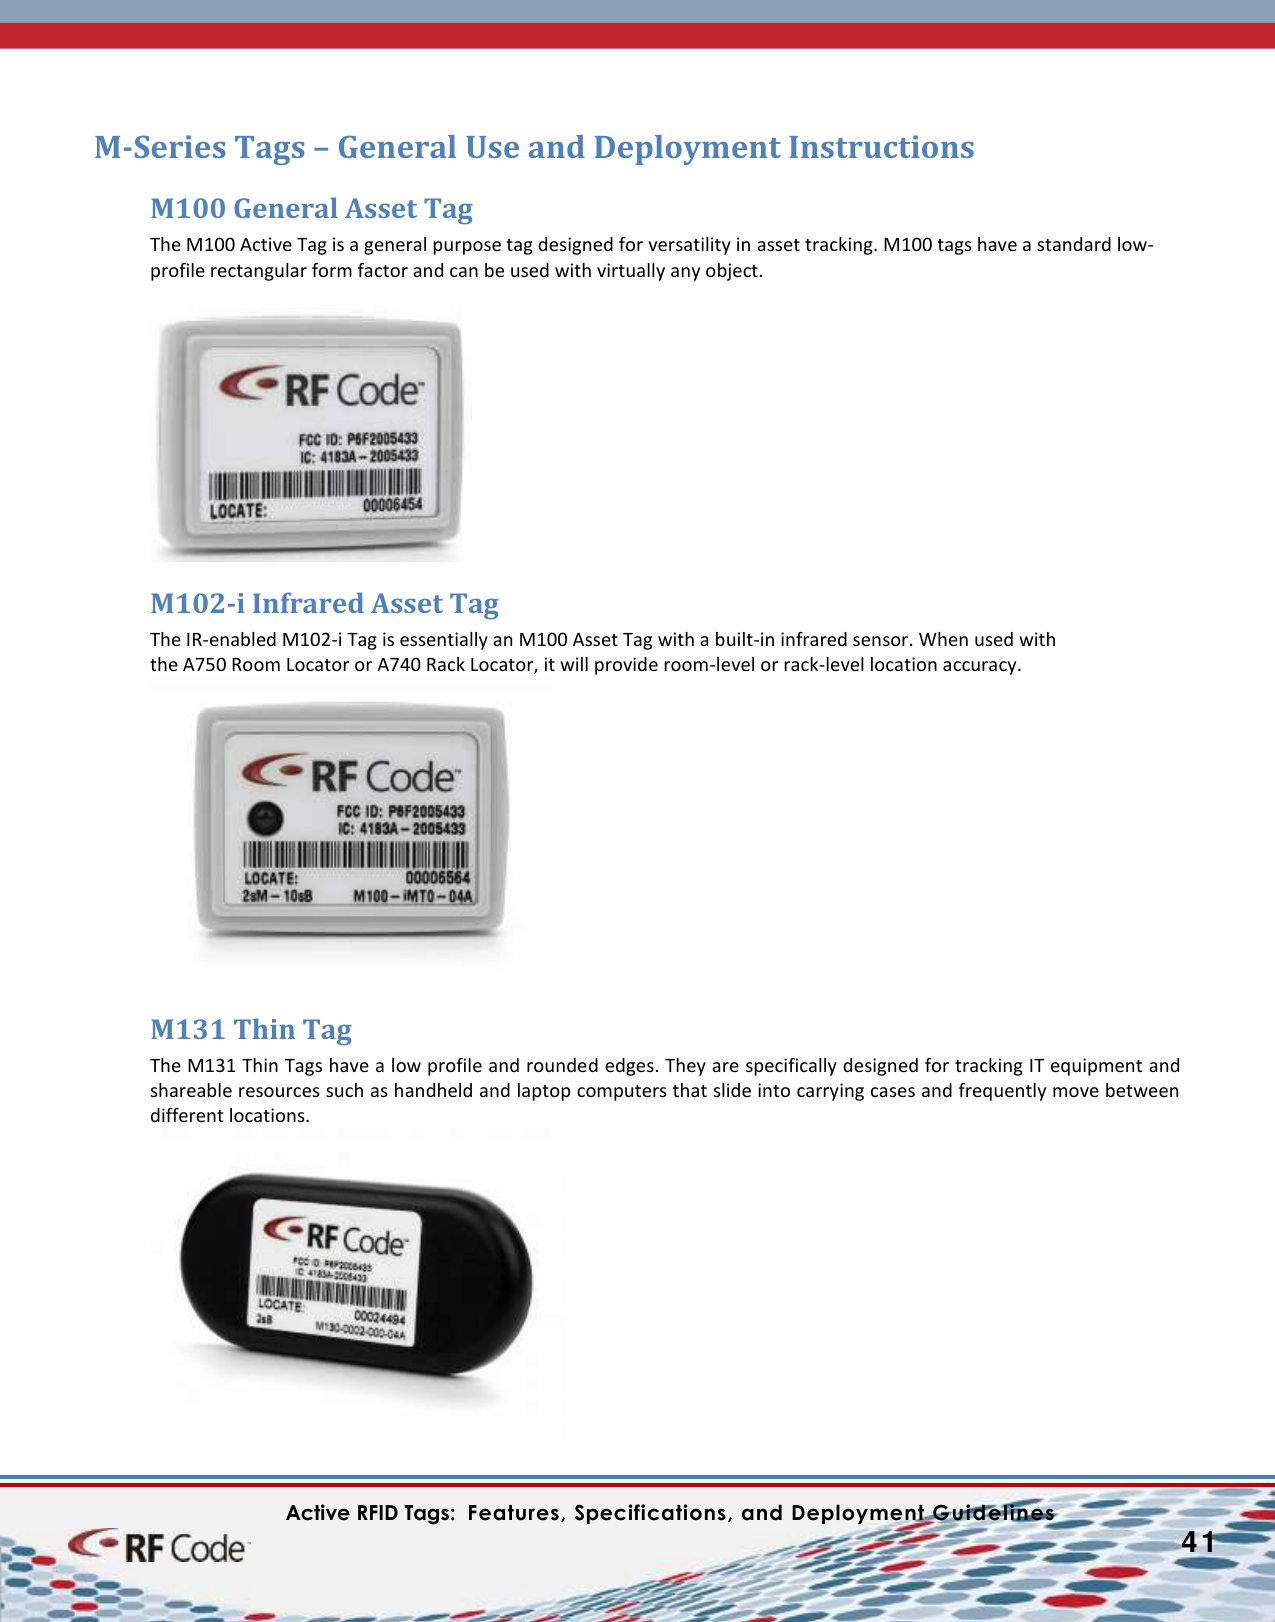    Active RFID Tags:  Features, Specifications, and Deployment Guidelines           41        M-Series Tags – General Use and Deployment Instructions M100 General Asset Tag The M100 Active Tag is a general purpose tag designed for versatility in asset tracking. M100 tags have a standard low-profile rectangular form factor and can be used with virtually any object.   M102-i Infrared Asset Tag The IR-enabled M102-i Tag is essentially an M100 Asset Tag with a built-in infrared sensor. When used with  the A750 Room Locator or A740 Rack Locator, it will provide room-level or rack-level location accuracy.M131 Thin Tag The M131 Thin Tags have a low profile and rounded edges. They are specifically designed for tracking IT equipment and shareable resources such as handheld and laptop computers that slide into carrying cases and frequently move between different locations. 